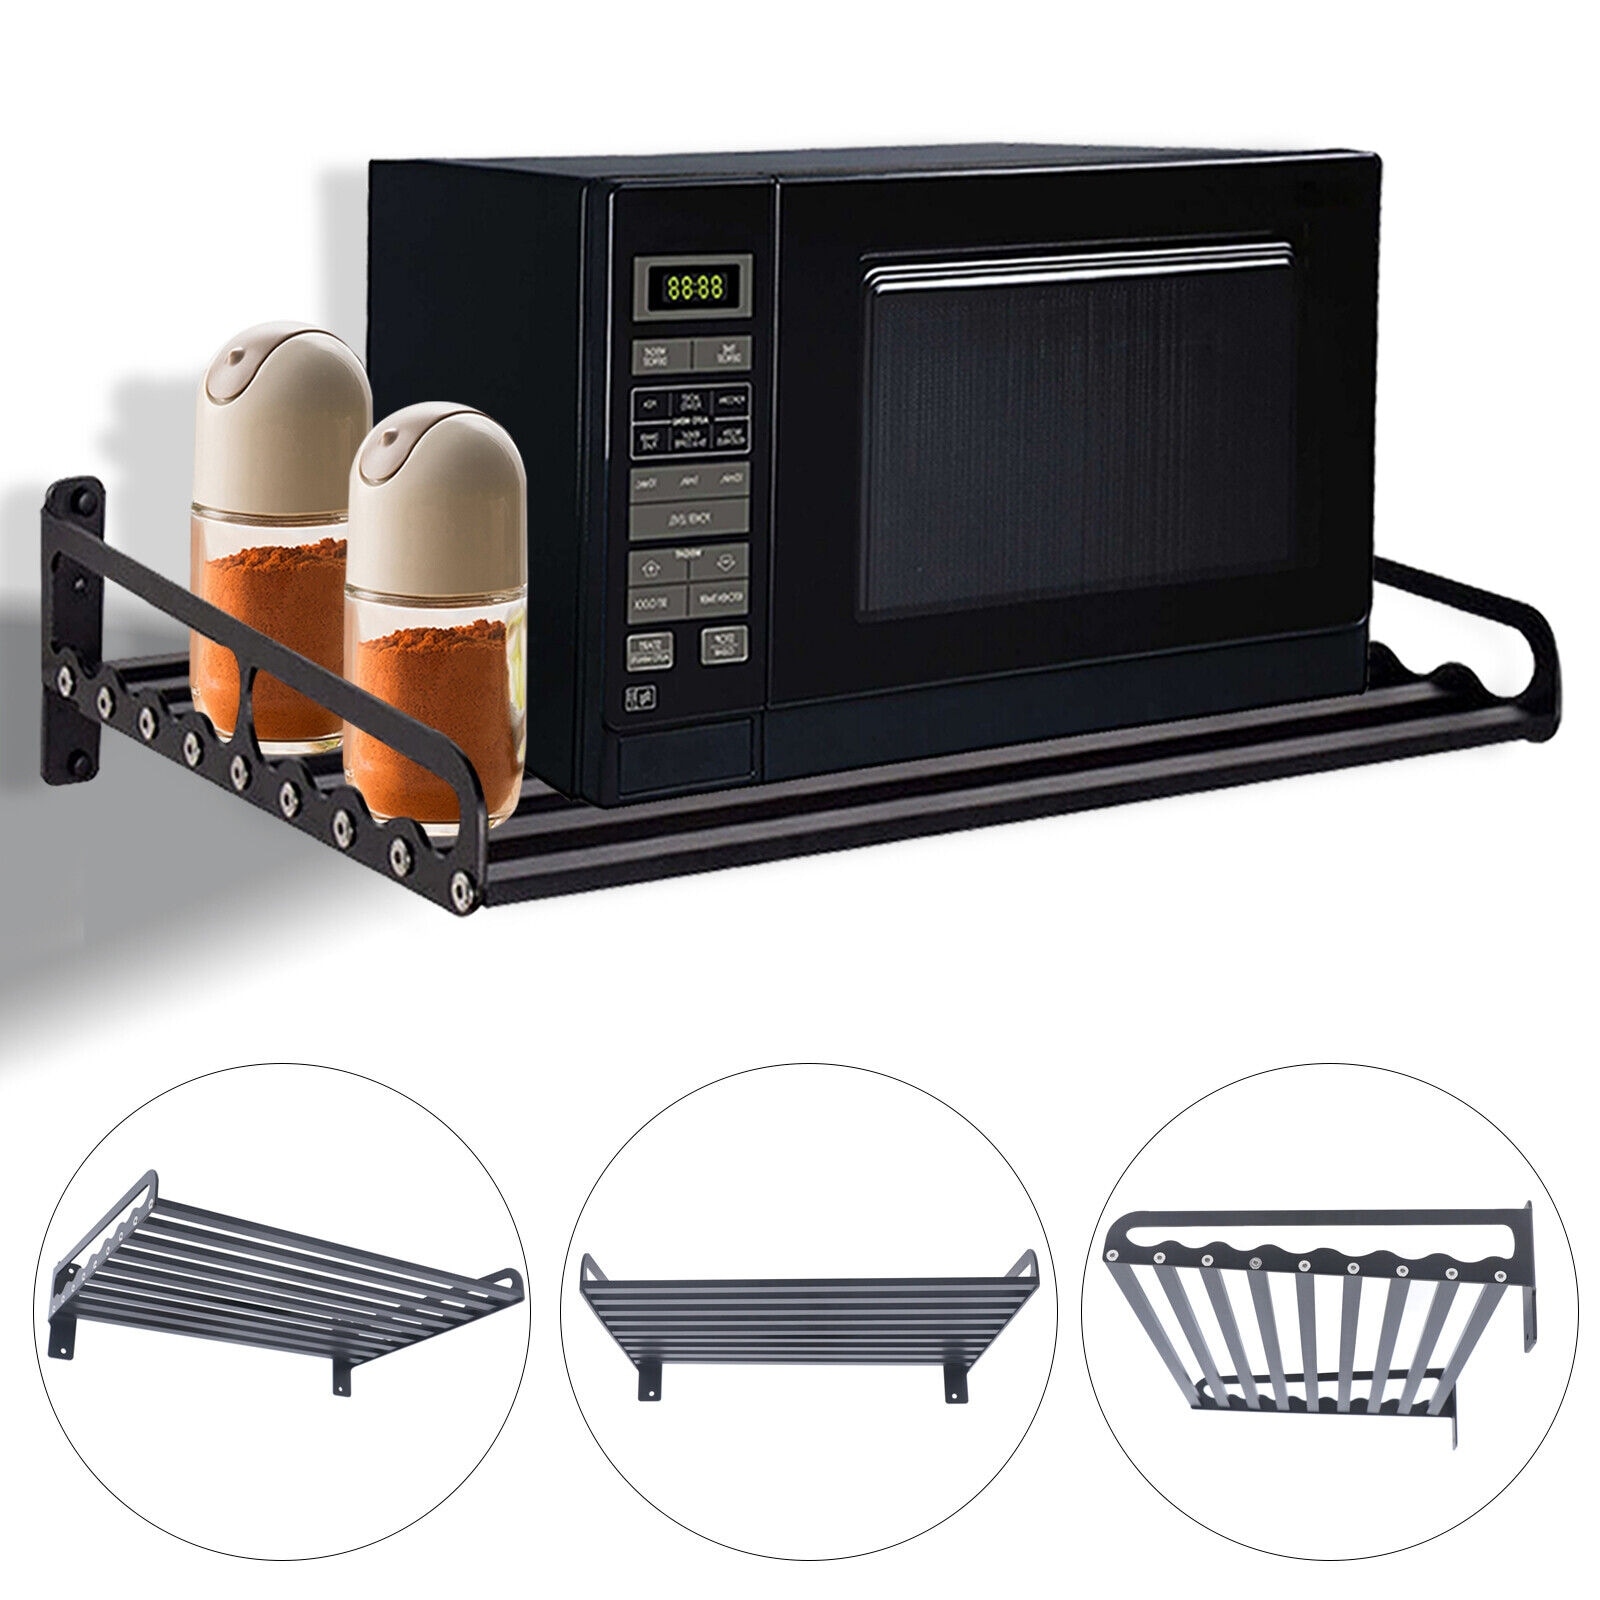 Wall-Mounted Microwave Oven Rack Kitchen Bakers Rack Space-Saving -  20*15.6*5.9inches - On Sale - Bed Bath & Beyond - 37127350